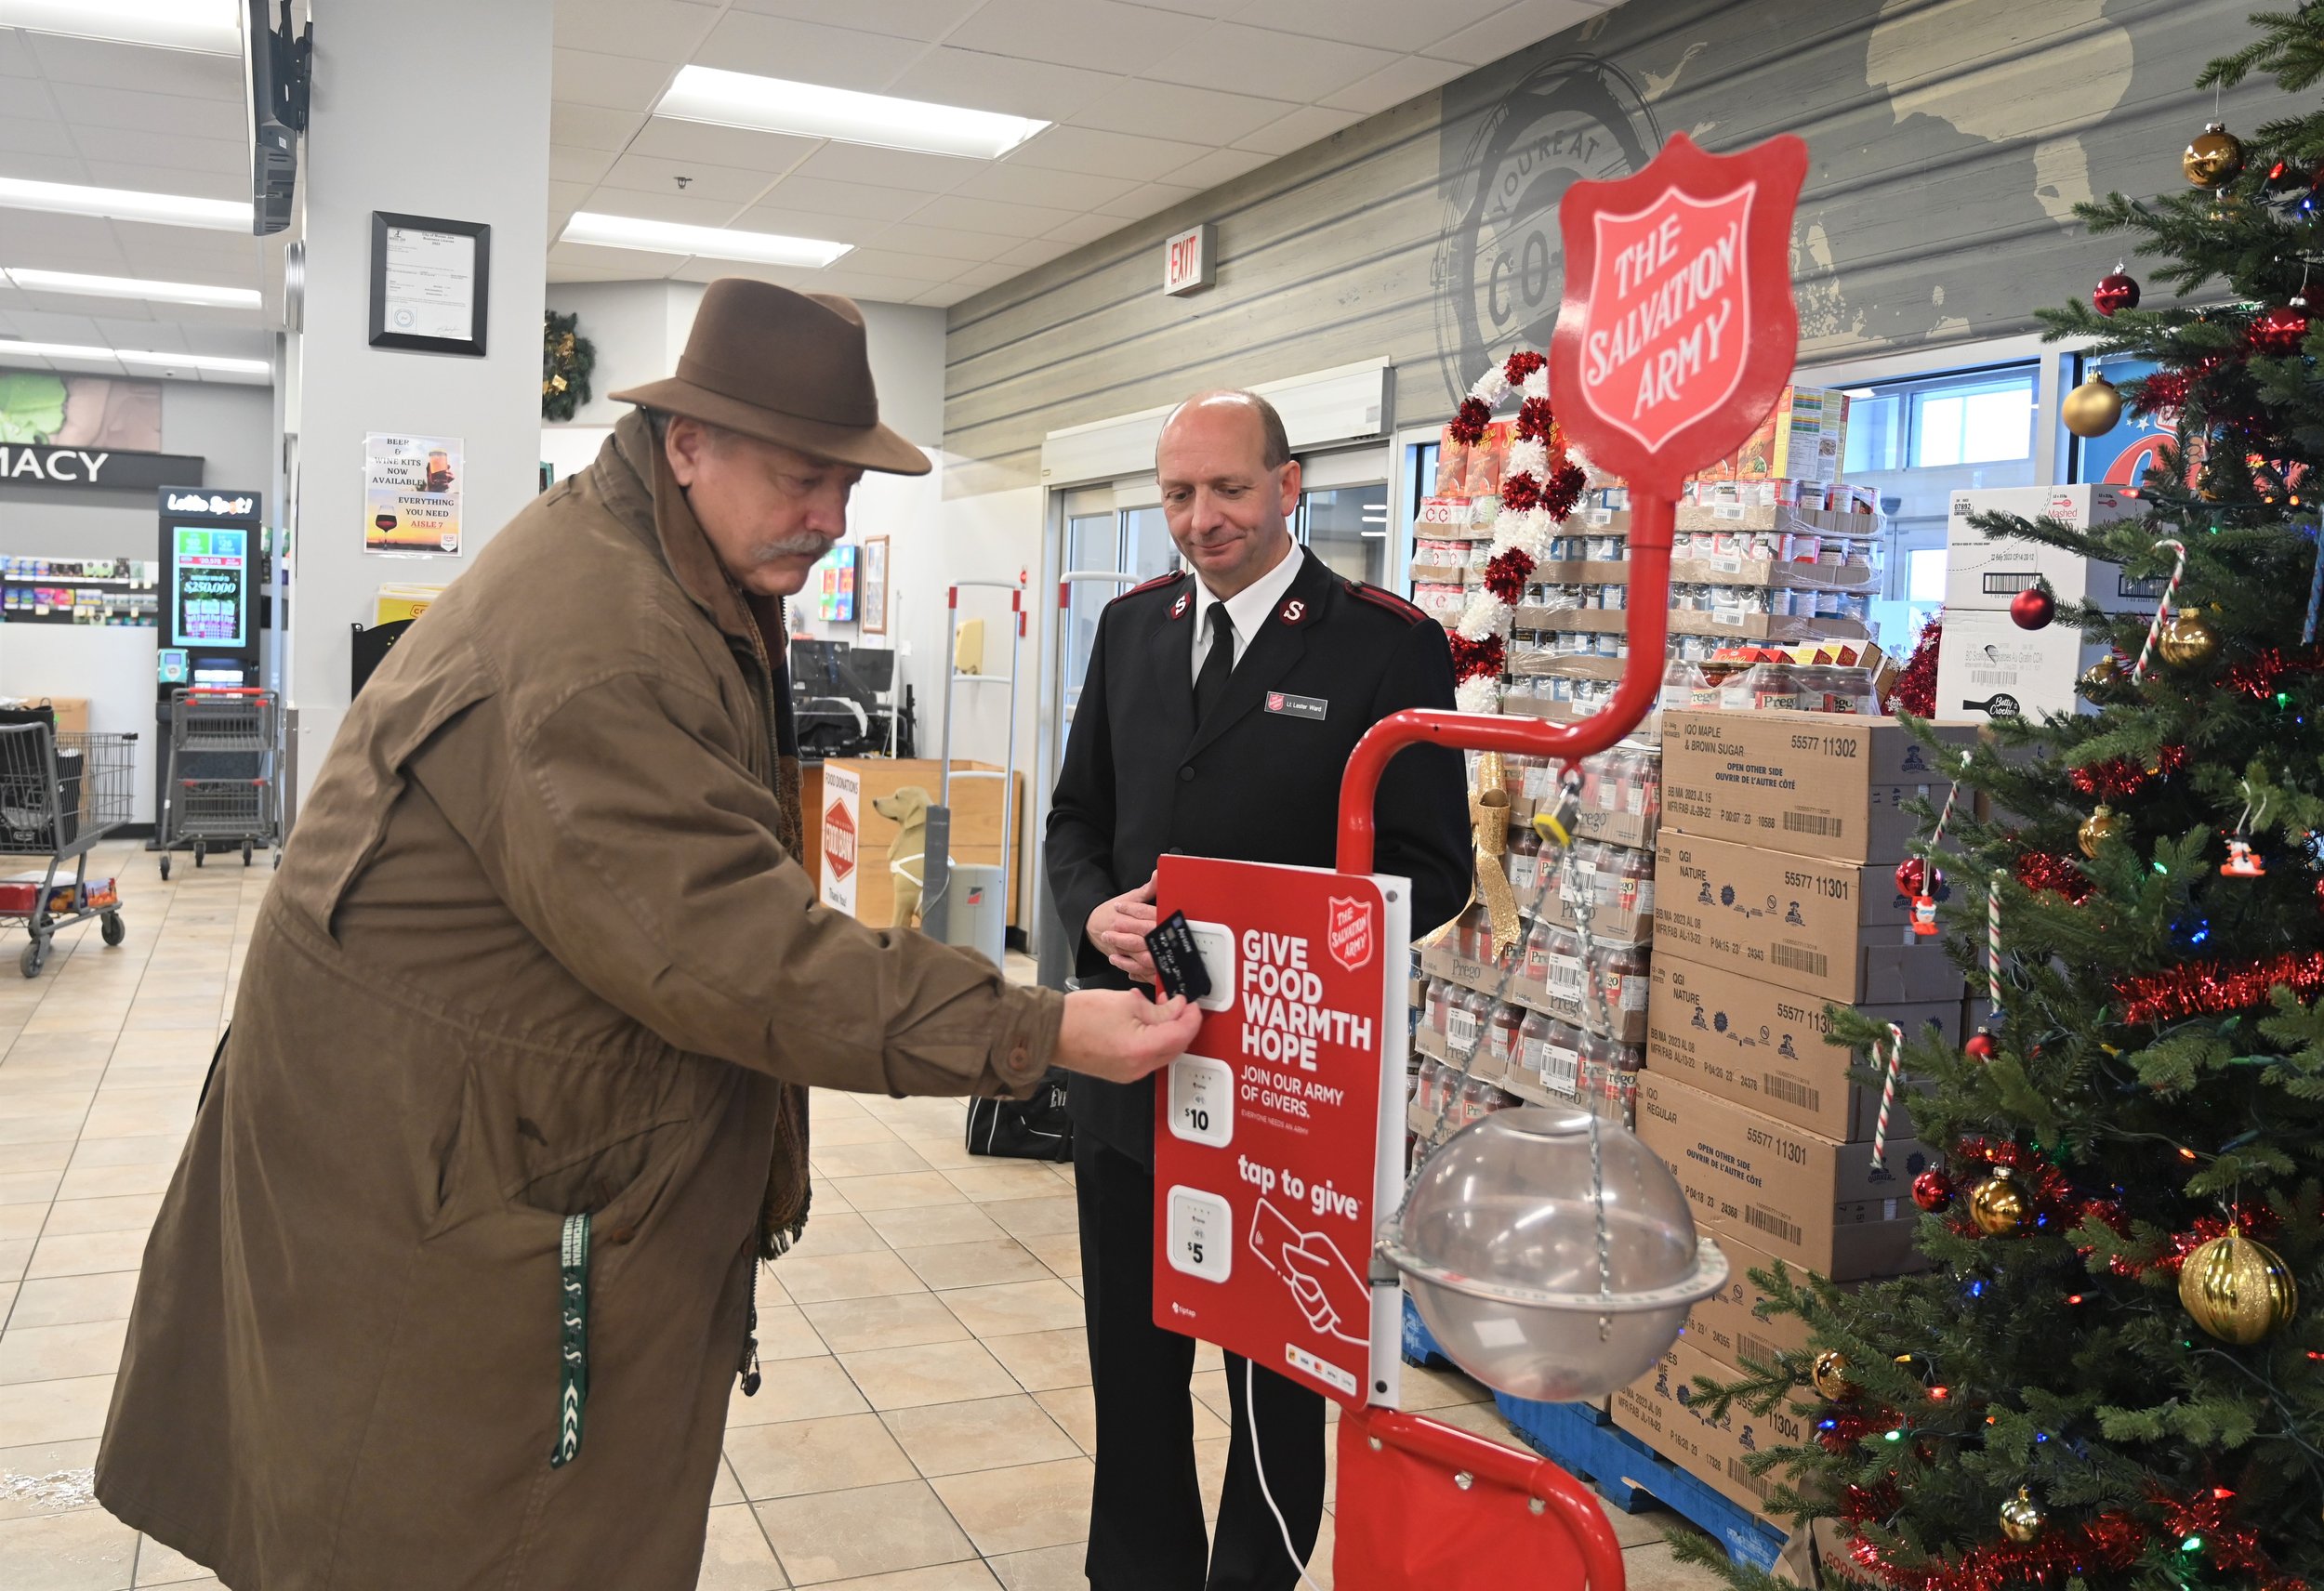 Join the Christmas Kettle campaign to give hope to local needy - Bradford  News